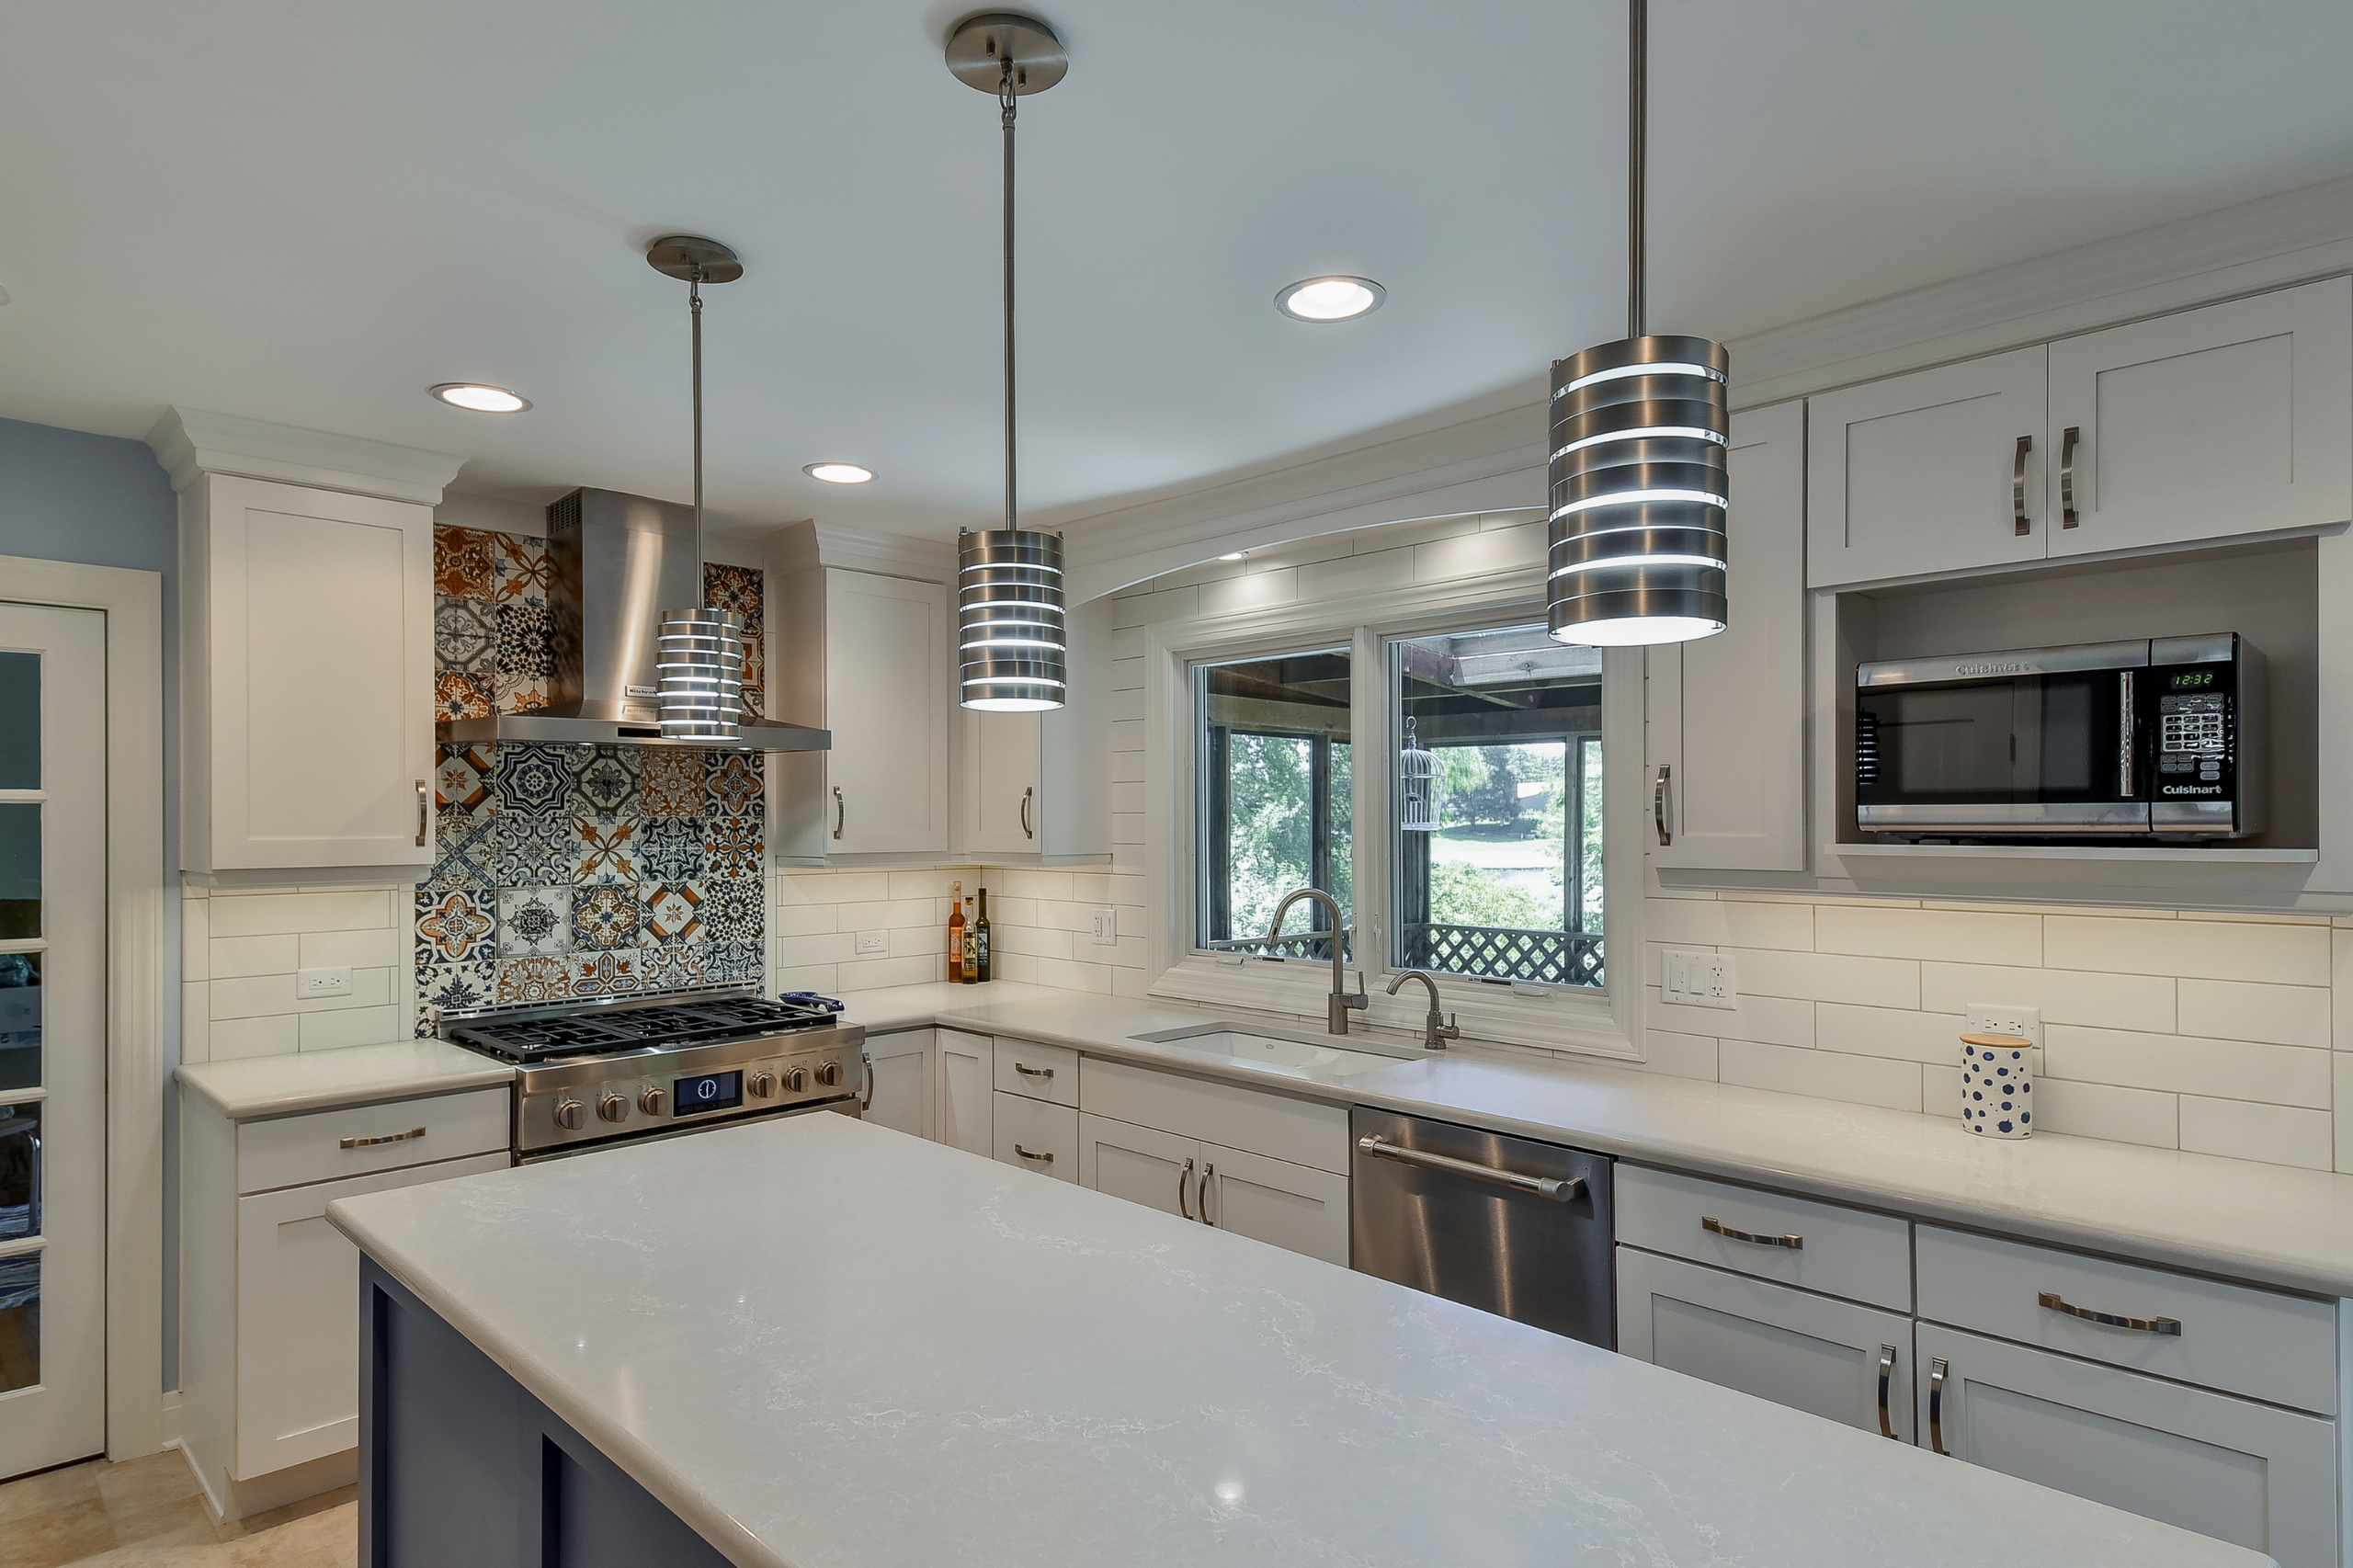 How to Choose the Right Kitchen Island Lights